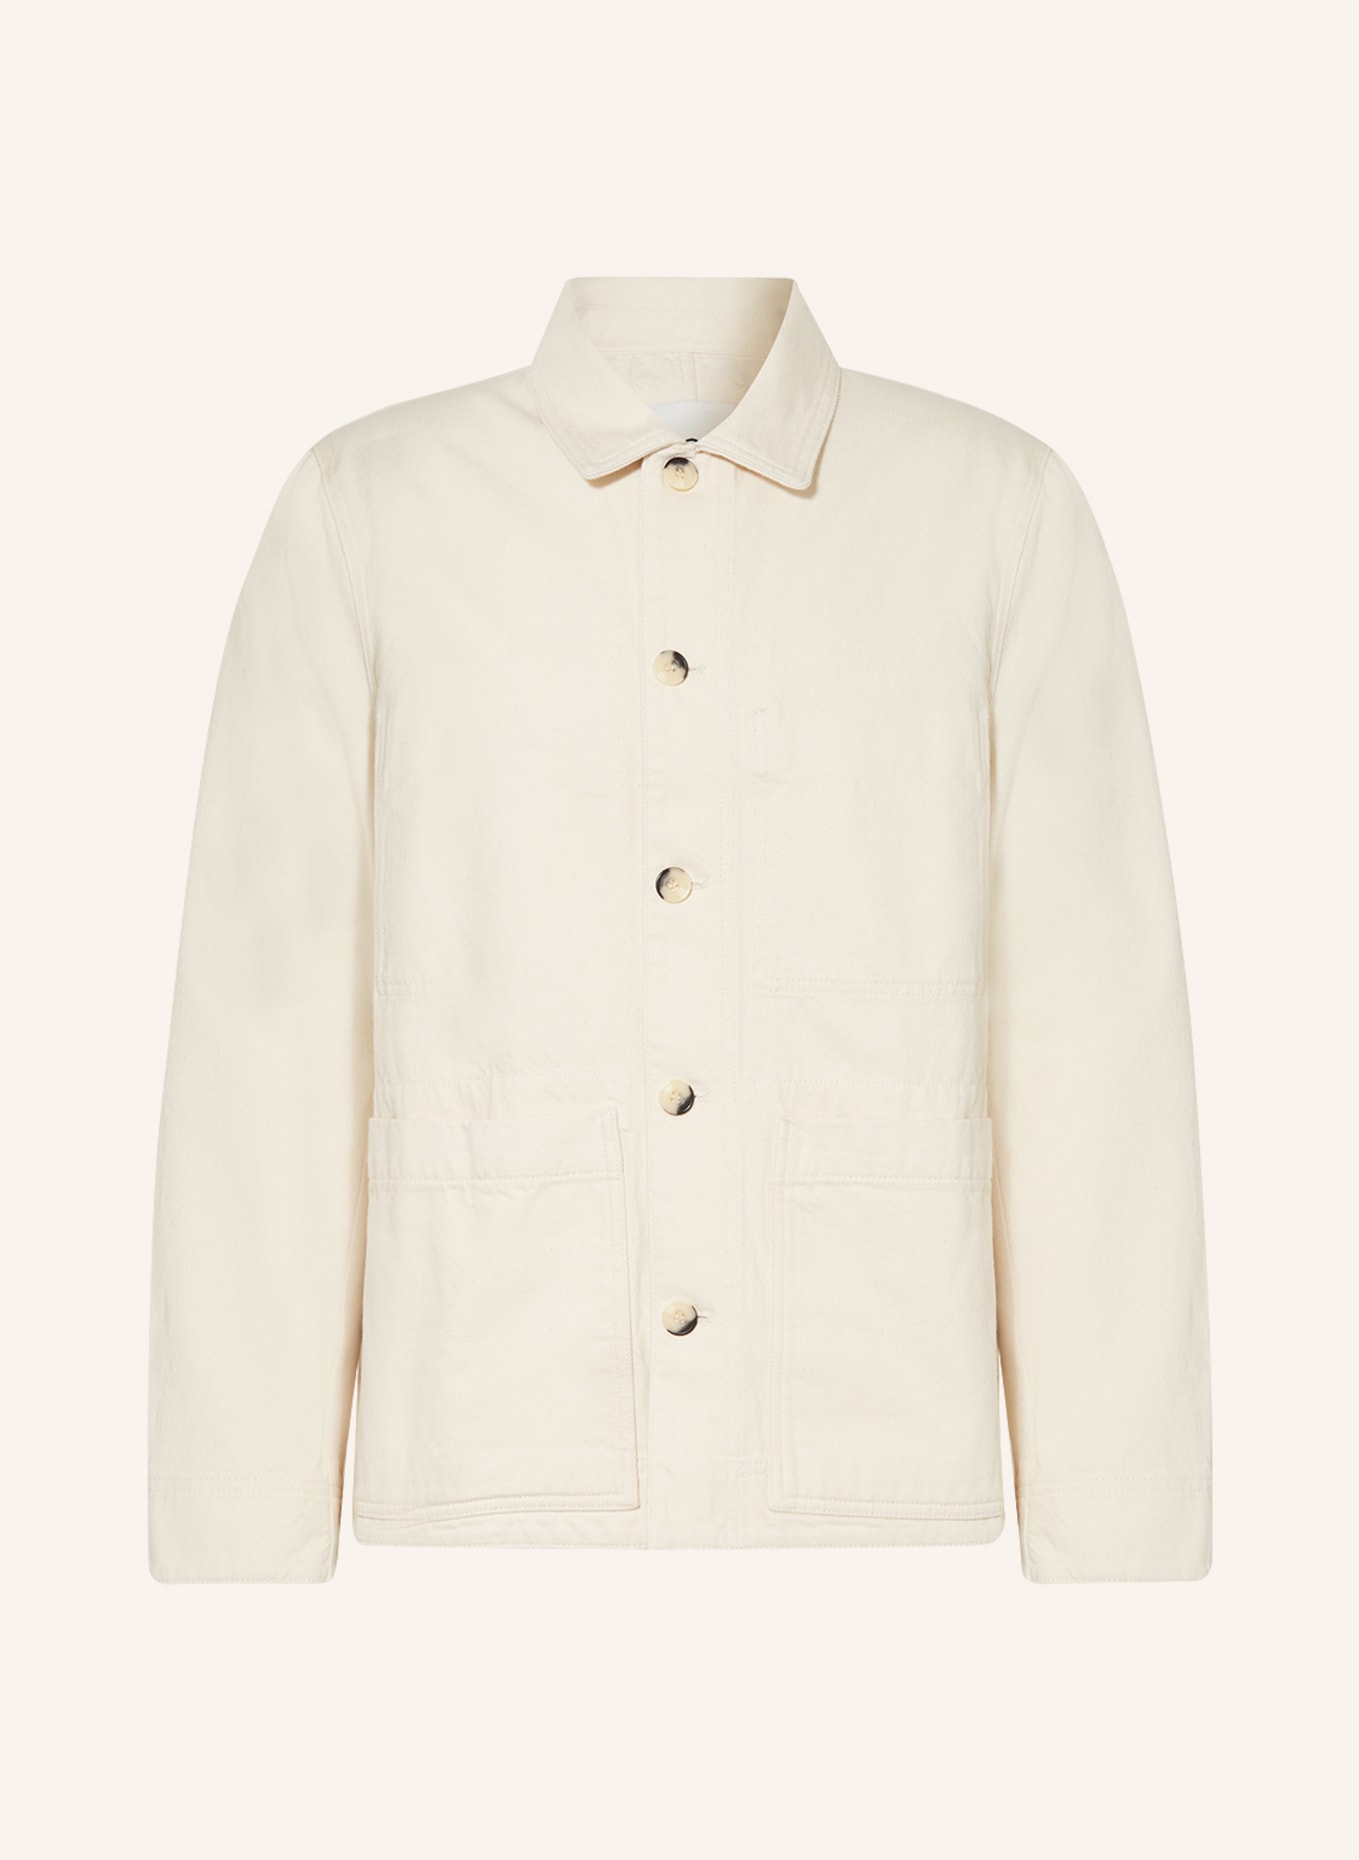 COS Jeans-Overjacket, Farbe: CREME (Bild 1)